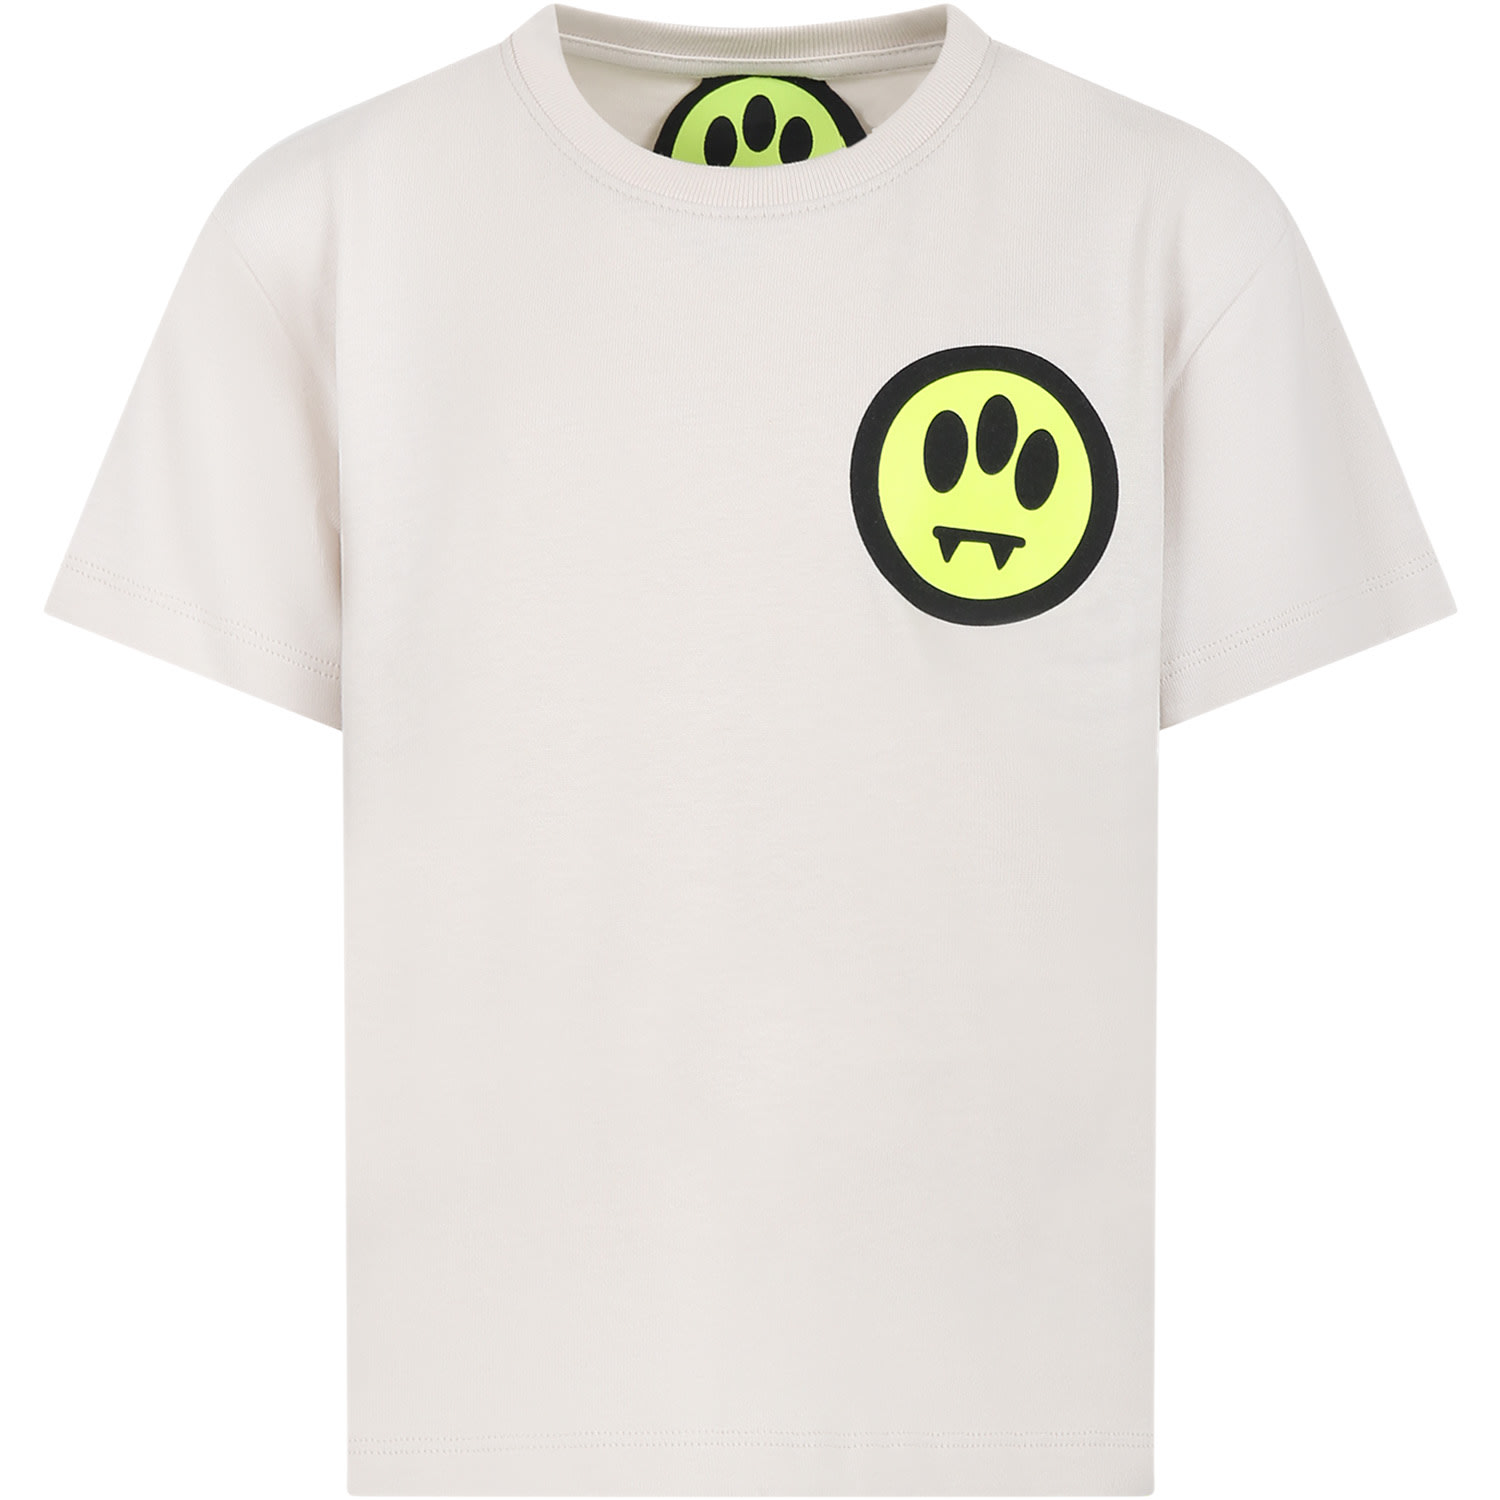 BARROW IVORY T-SHIRT FOR KIDS WITH LOGO AND SMILEY